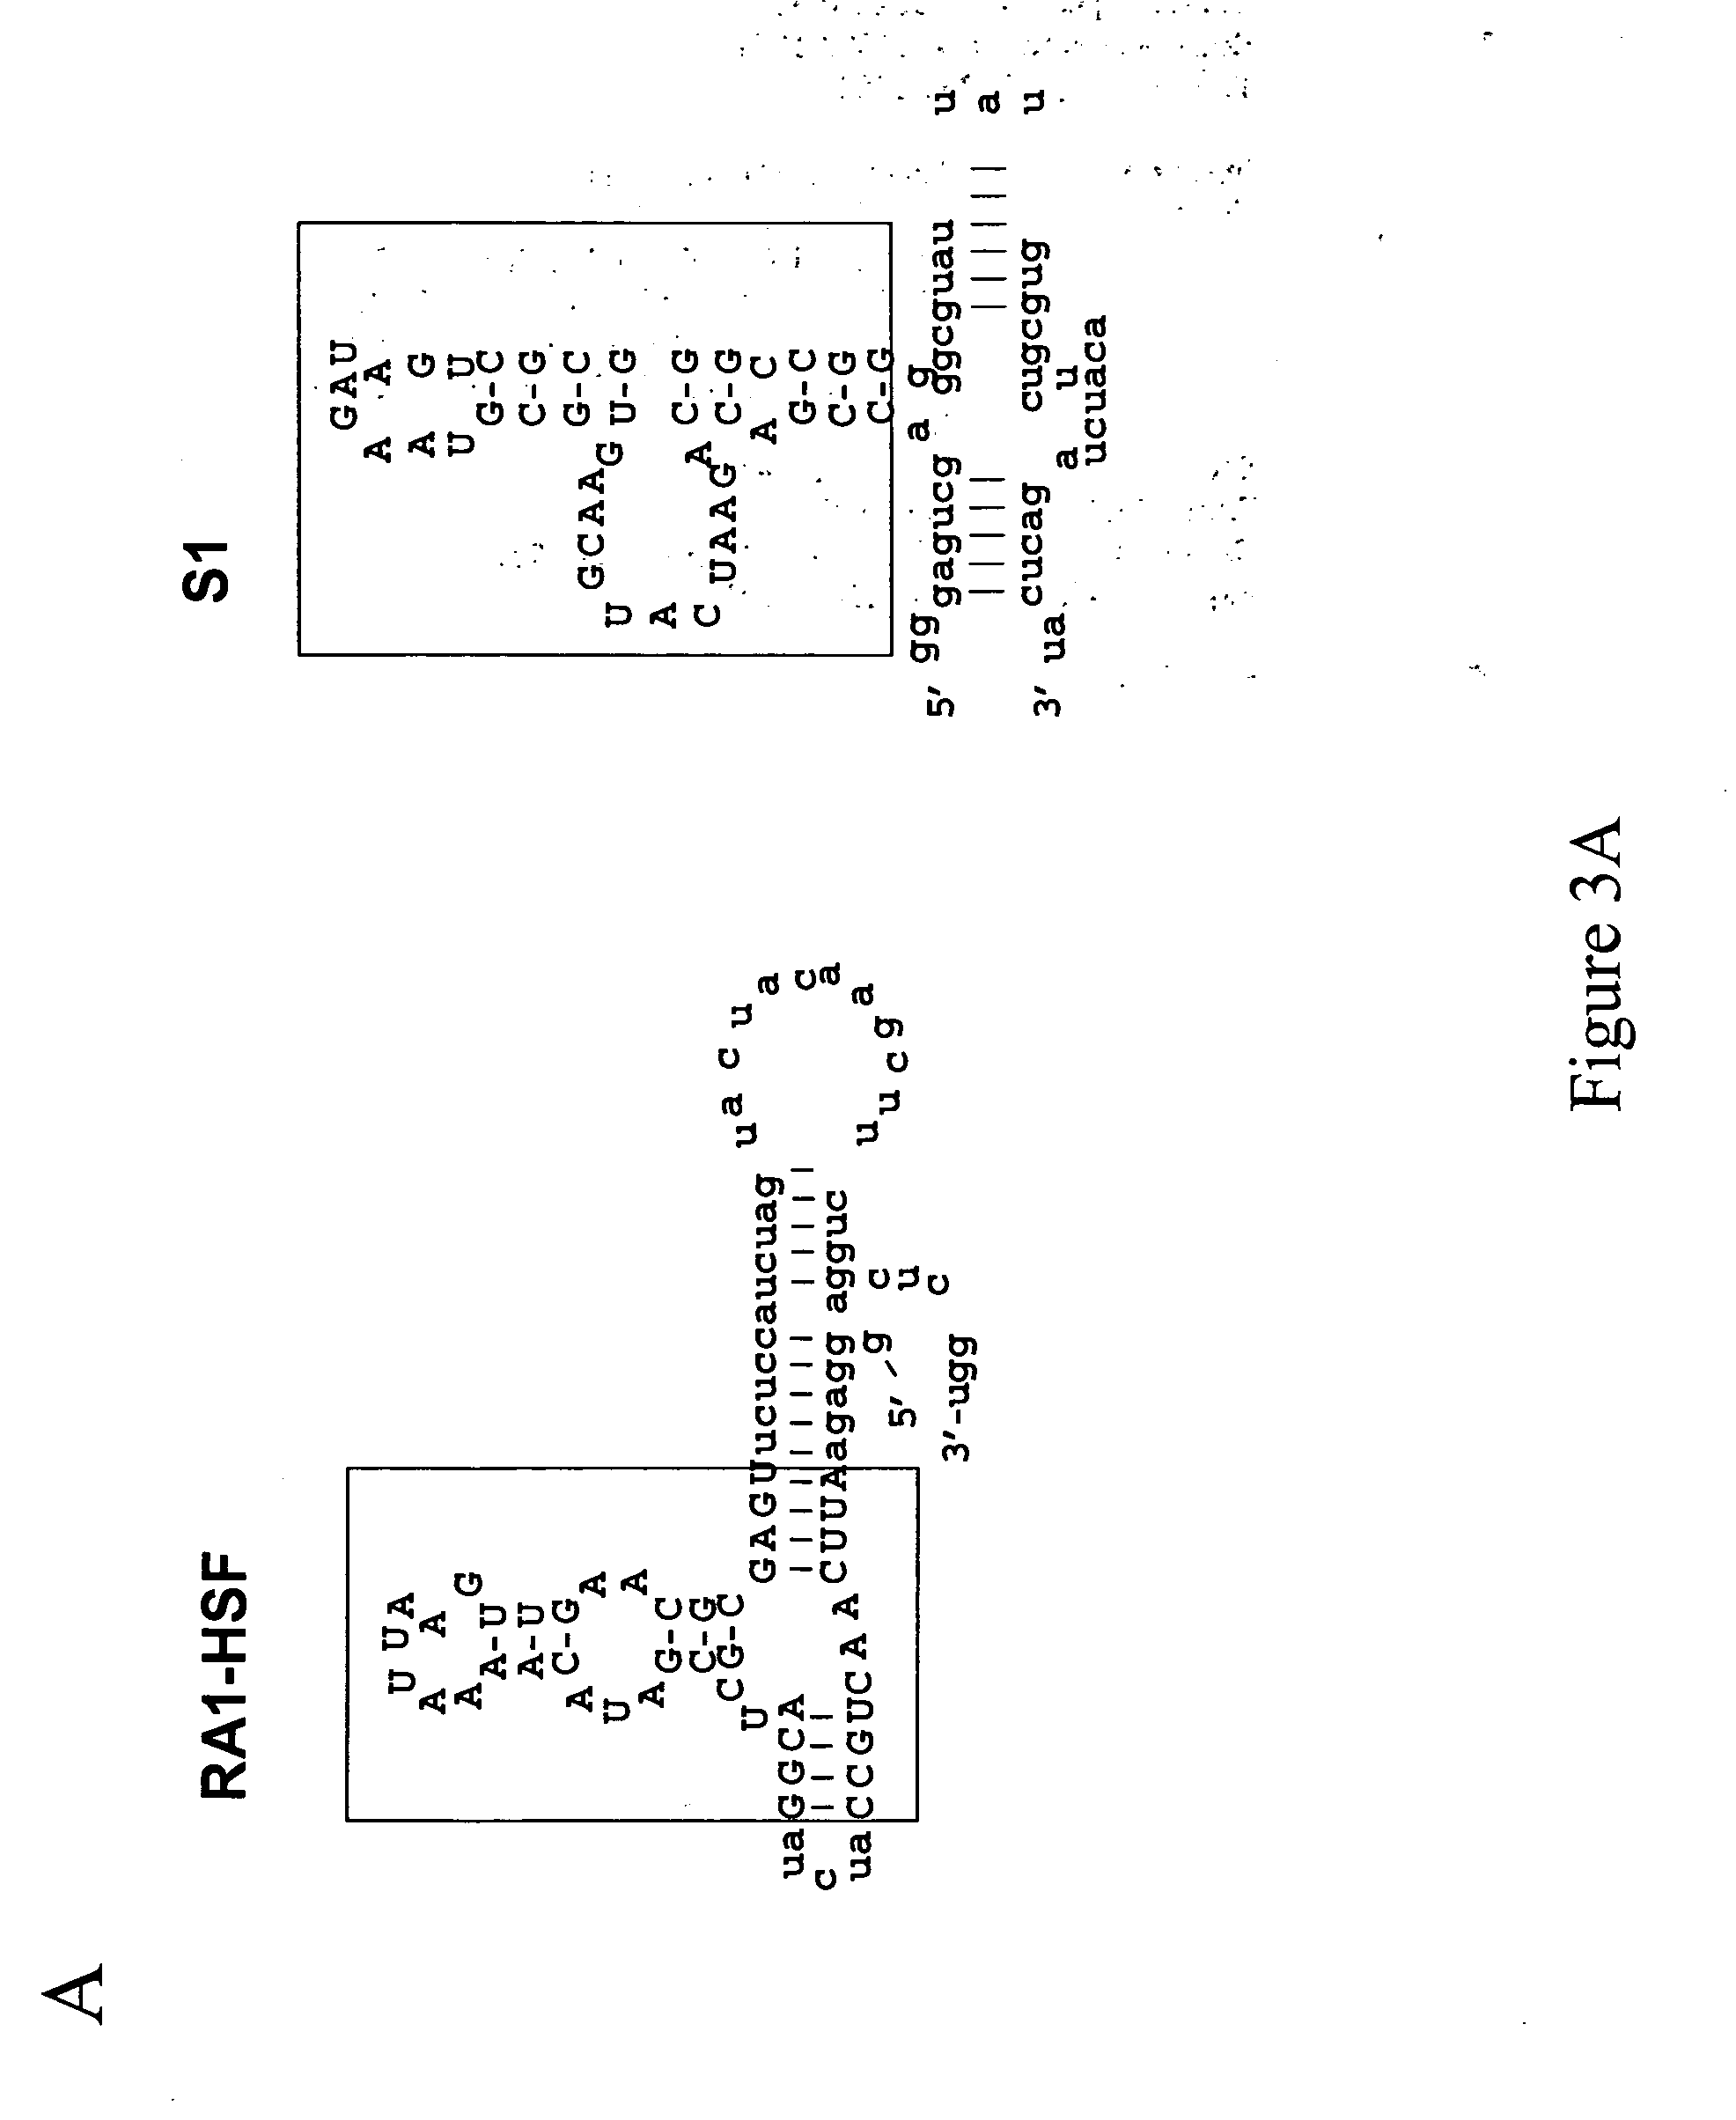 Modular design and construction of nucleic acid molecules, aptamer-derived nucleic acid constructs, RNA scaffolds, their expression, and methods of use